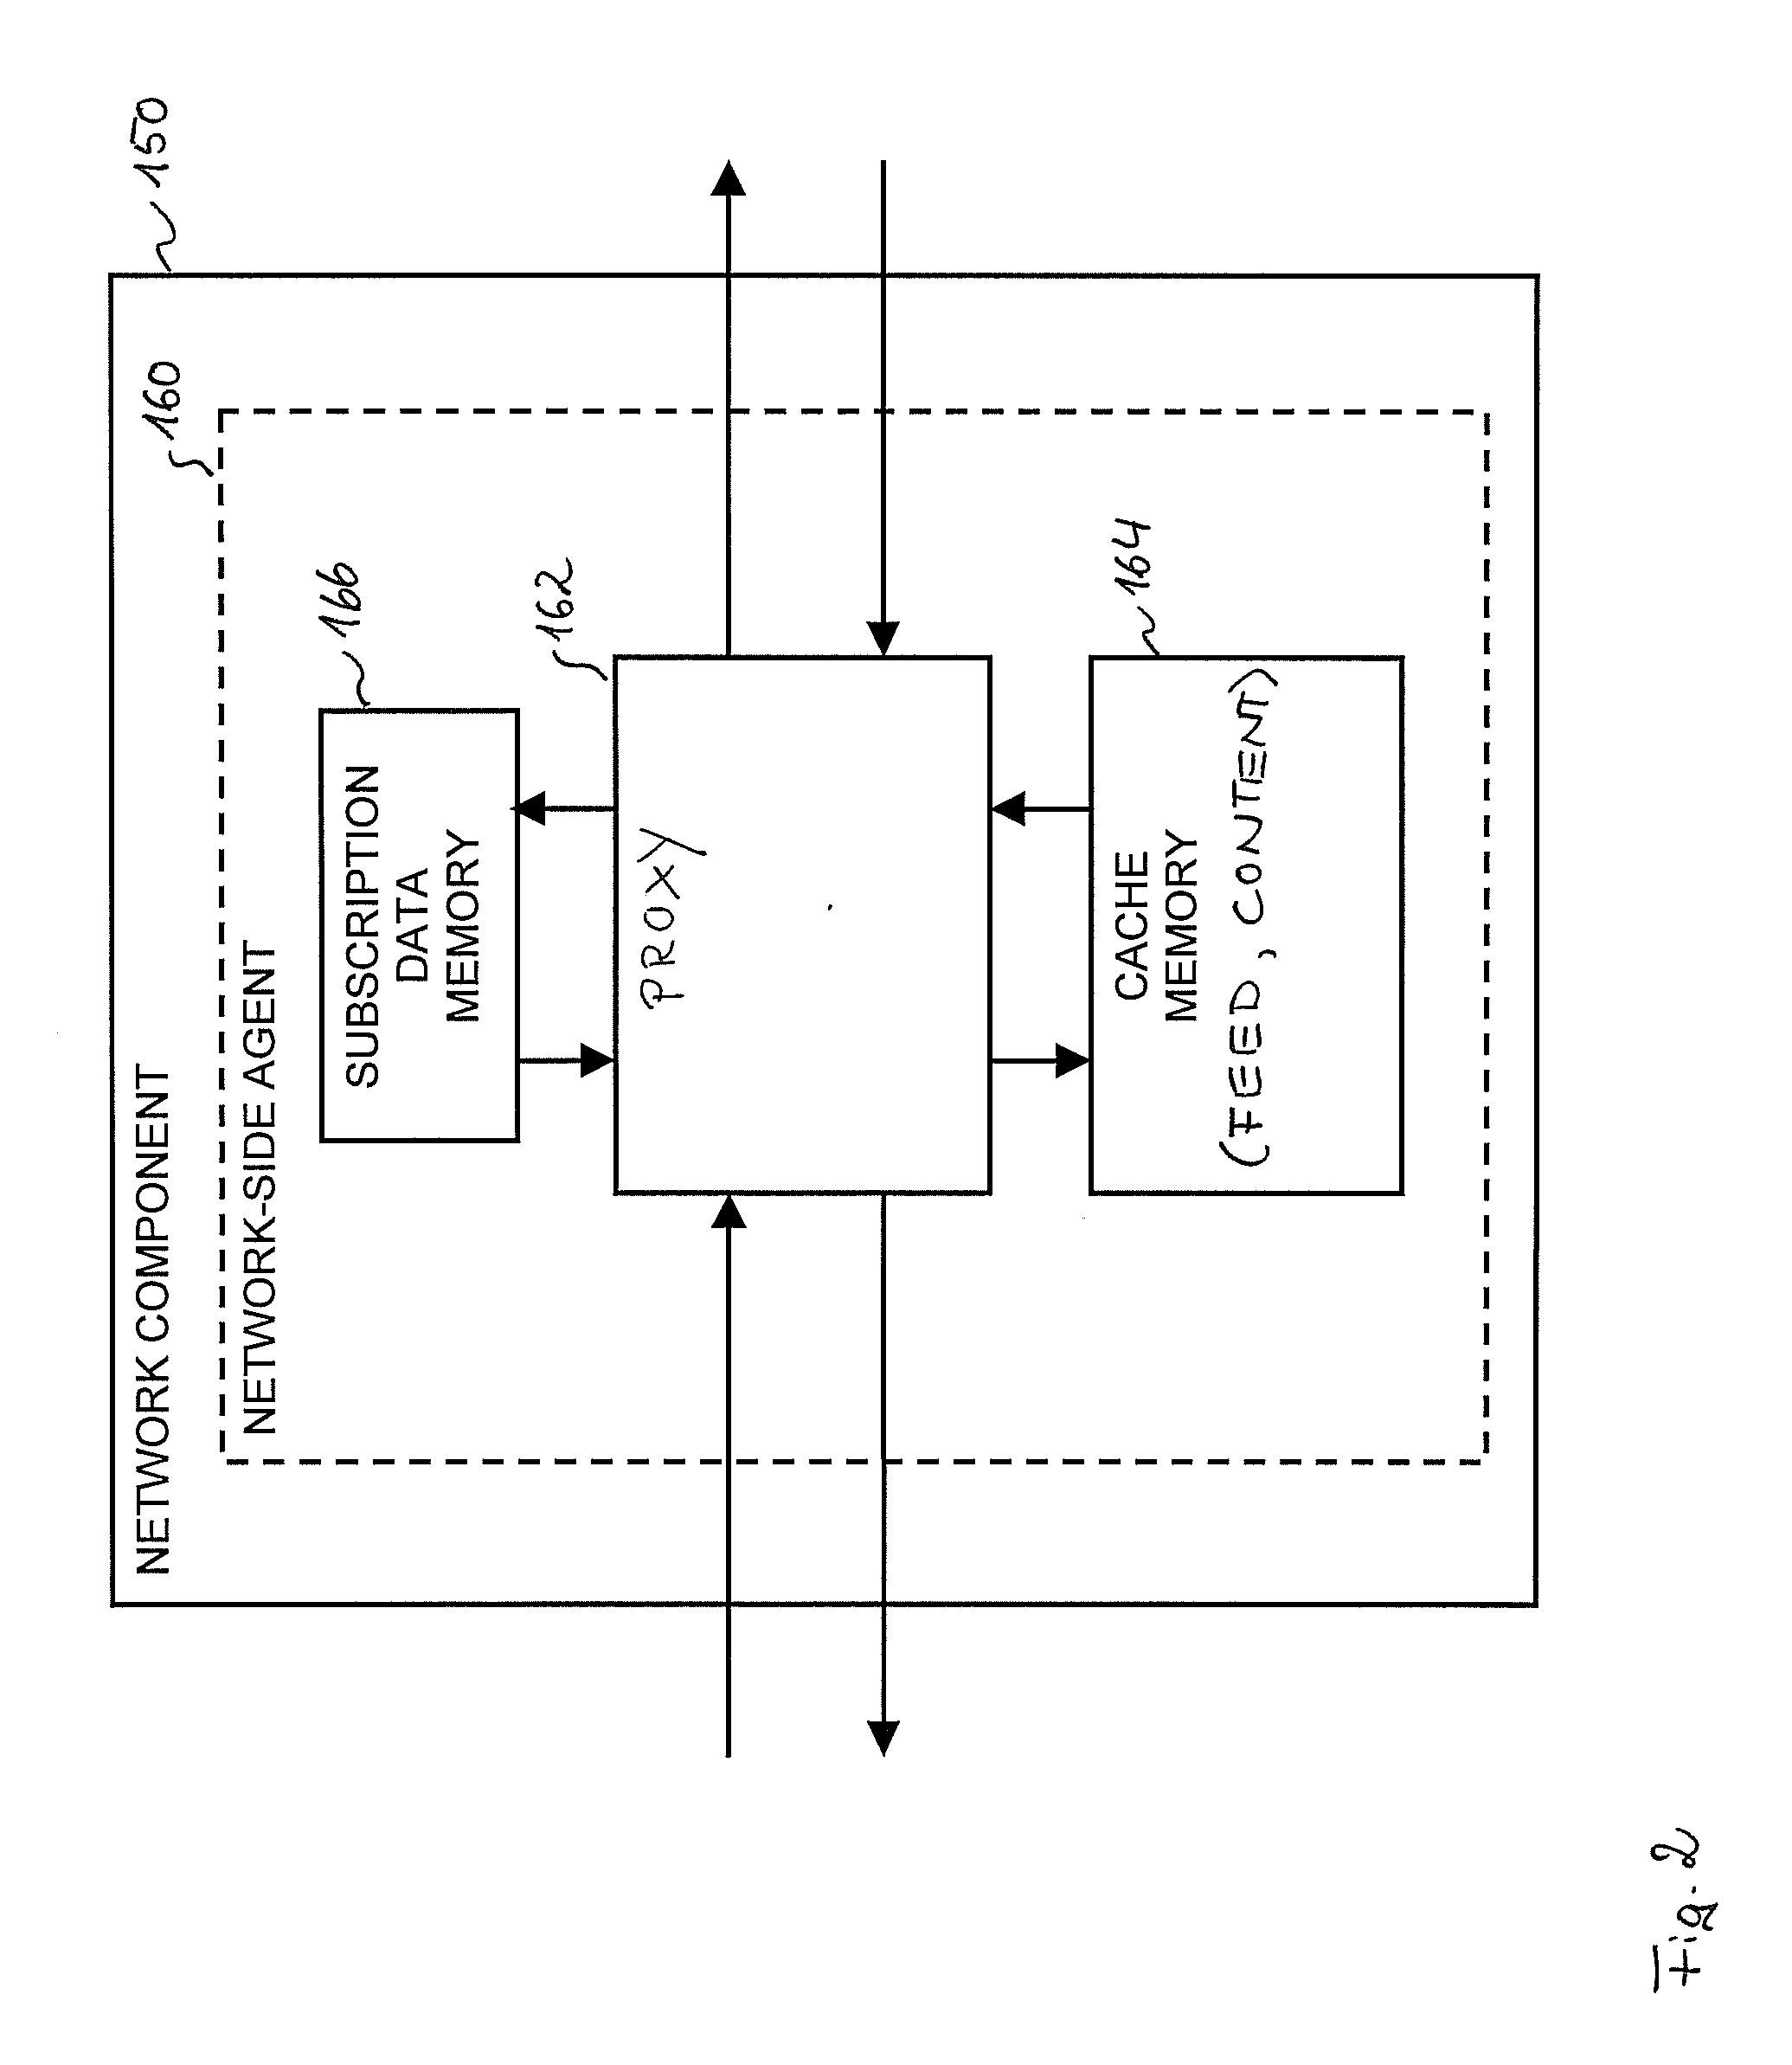 Techniques for Feed-Based Automatic Transmission of Content to a Mobile Terminal